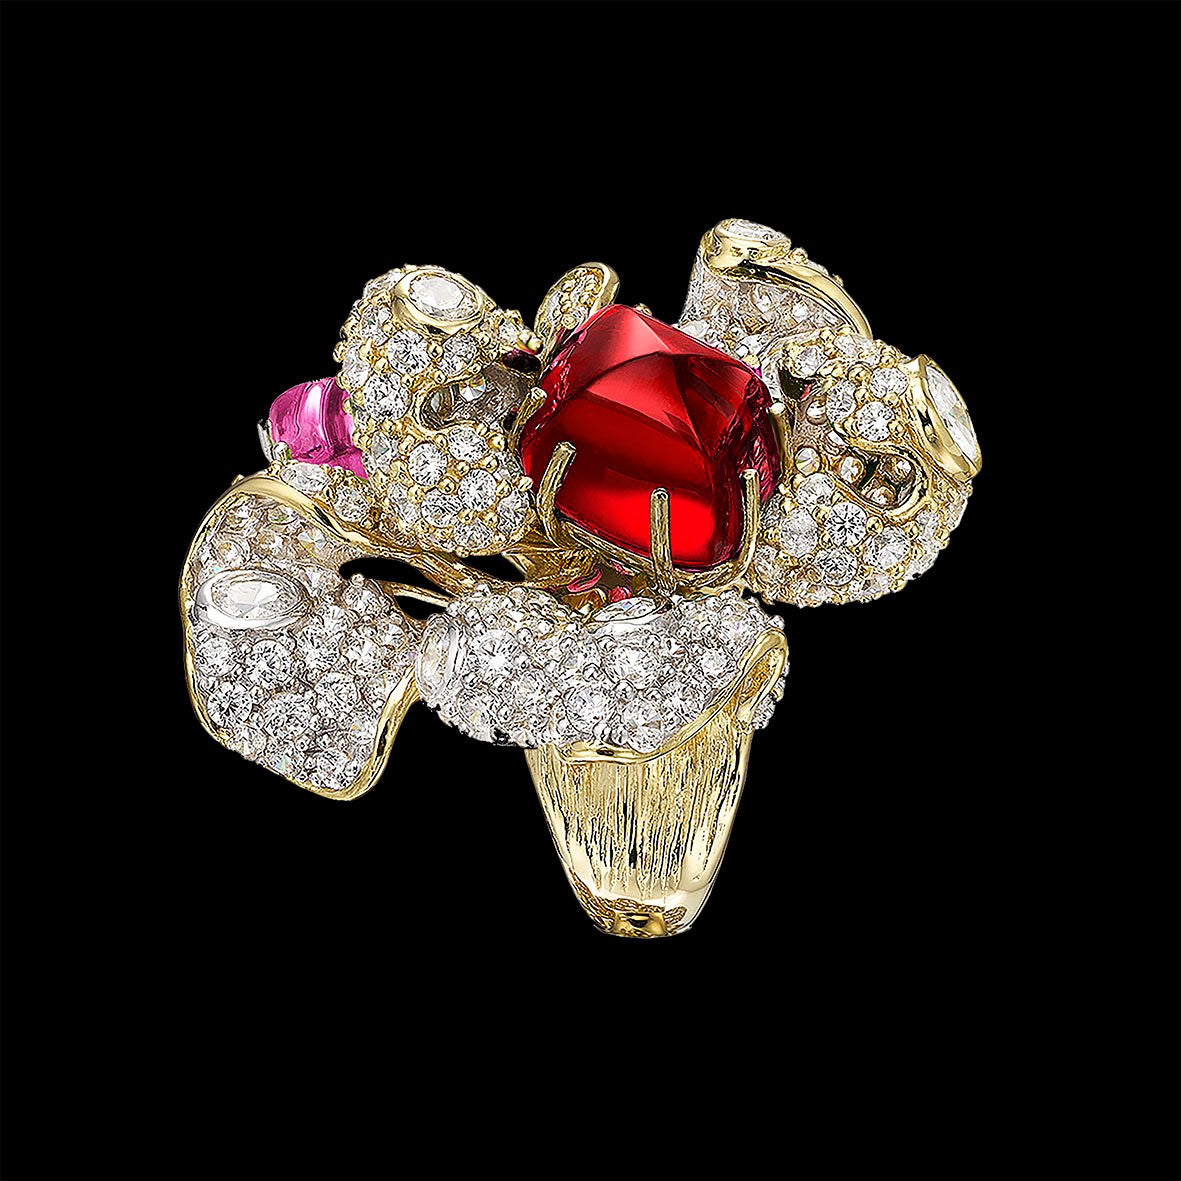 Ruby Blossom Ring, Ring, Anabela Chan Joaillerie - Fine jewelry with laboratory grown and created gemstones hand-crafted in the United Kingdom. Anabela Chan Joaillerie is the first fine jewellery brand in the world to champion laboratory-grown and created gemstones with high jewellery design, artisanal craftsmanship and a focus on ethical and sustainable innovations.